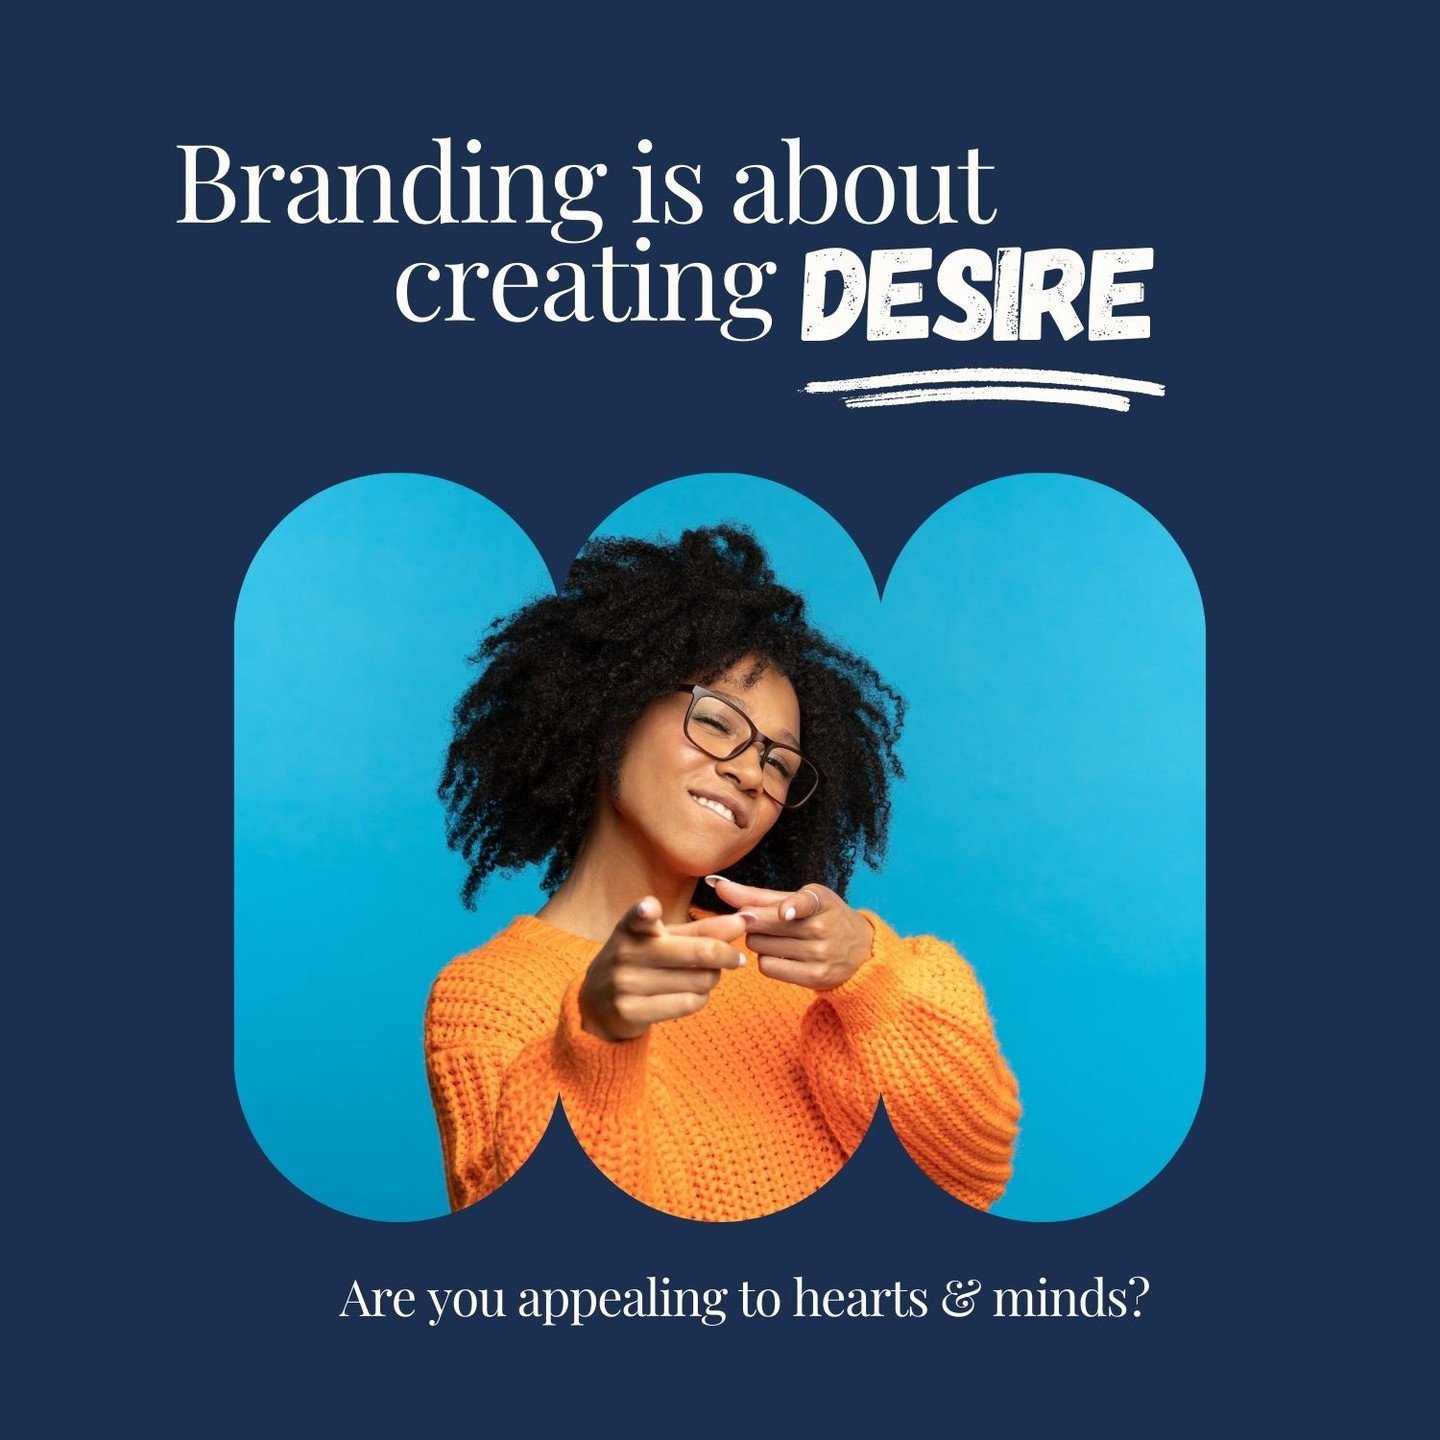 Very few brands will generate the same love from their followers as some of the big brands like Apple, Nike, Louis Vuitton etc have done, but branding is essentially about creating desire.

You create this desire by sharing consistent brand messaging